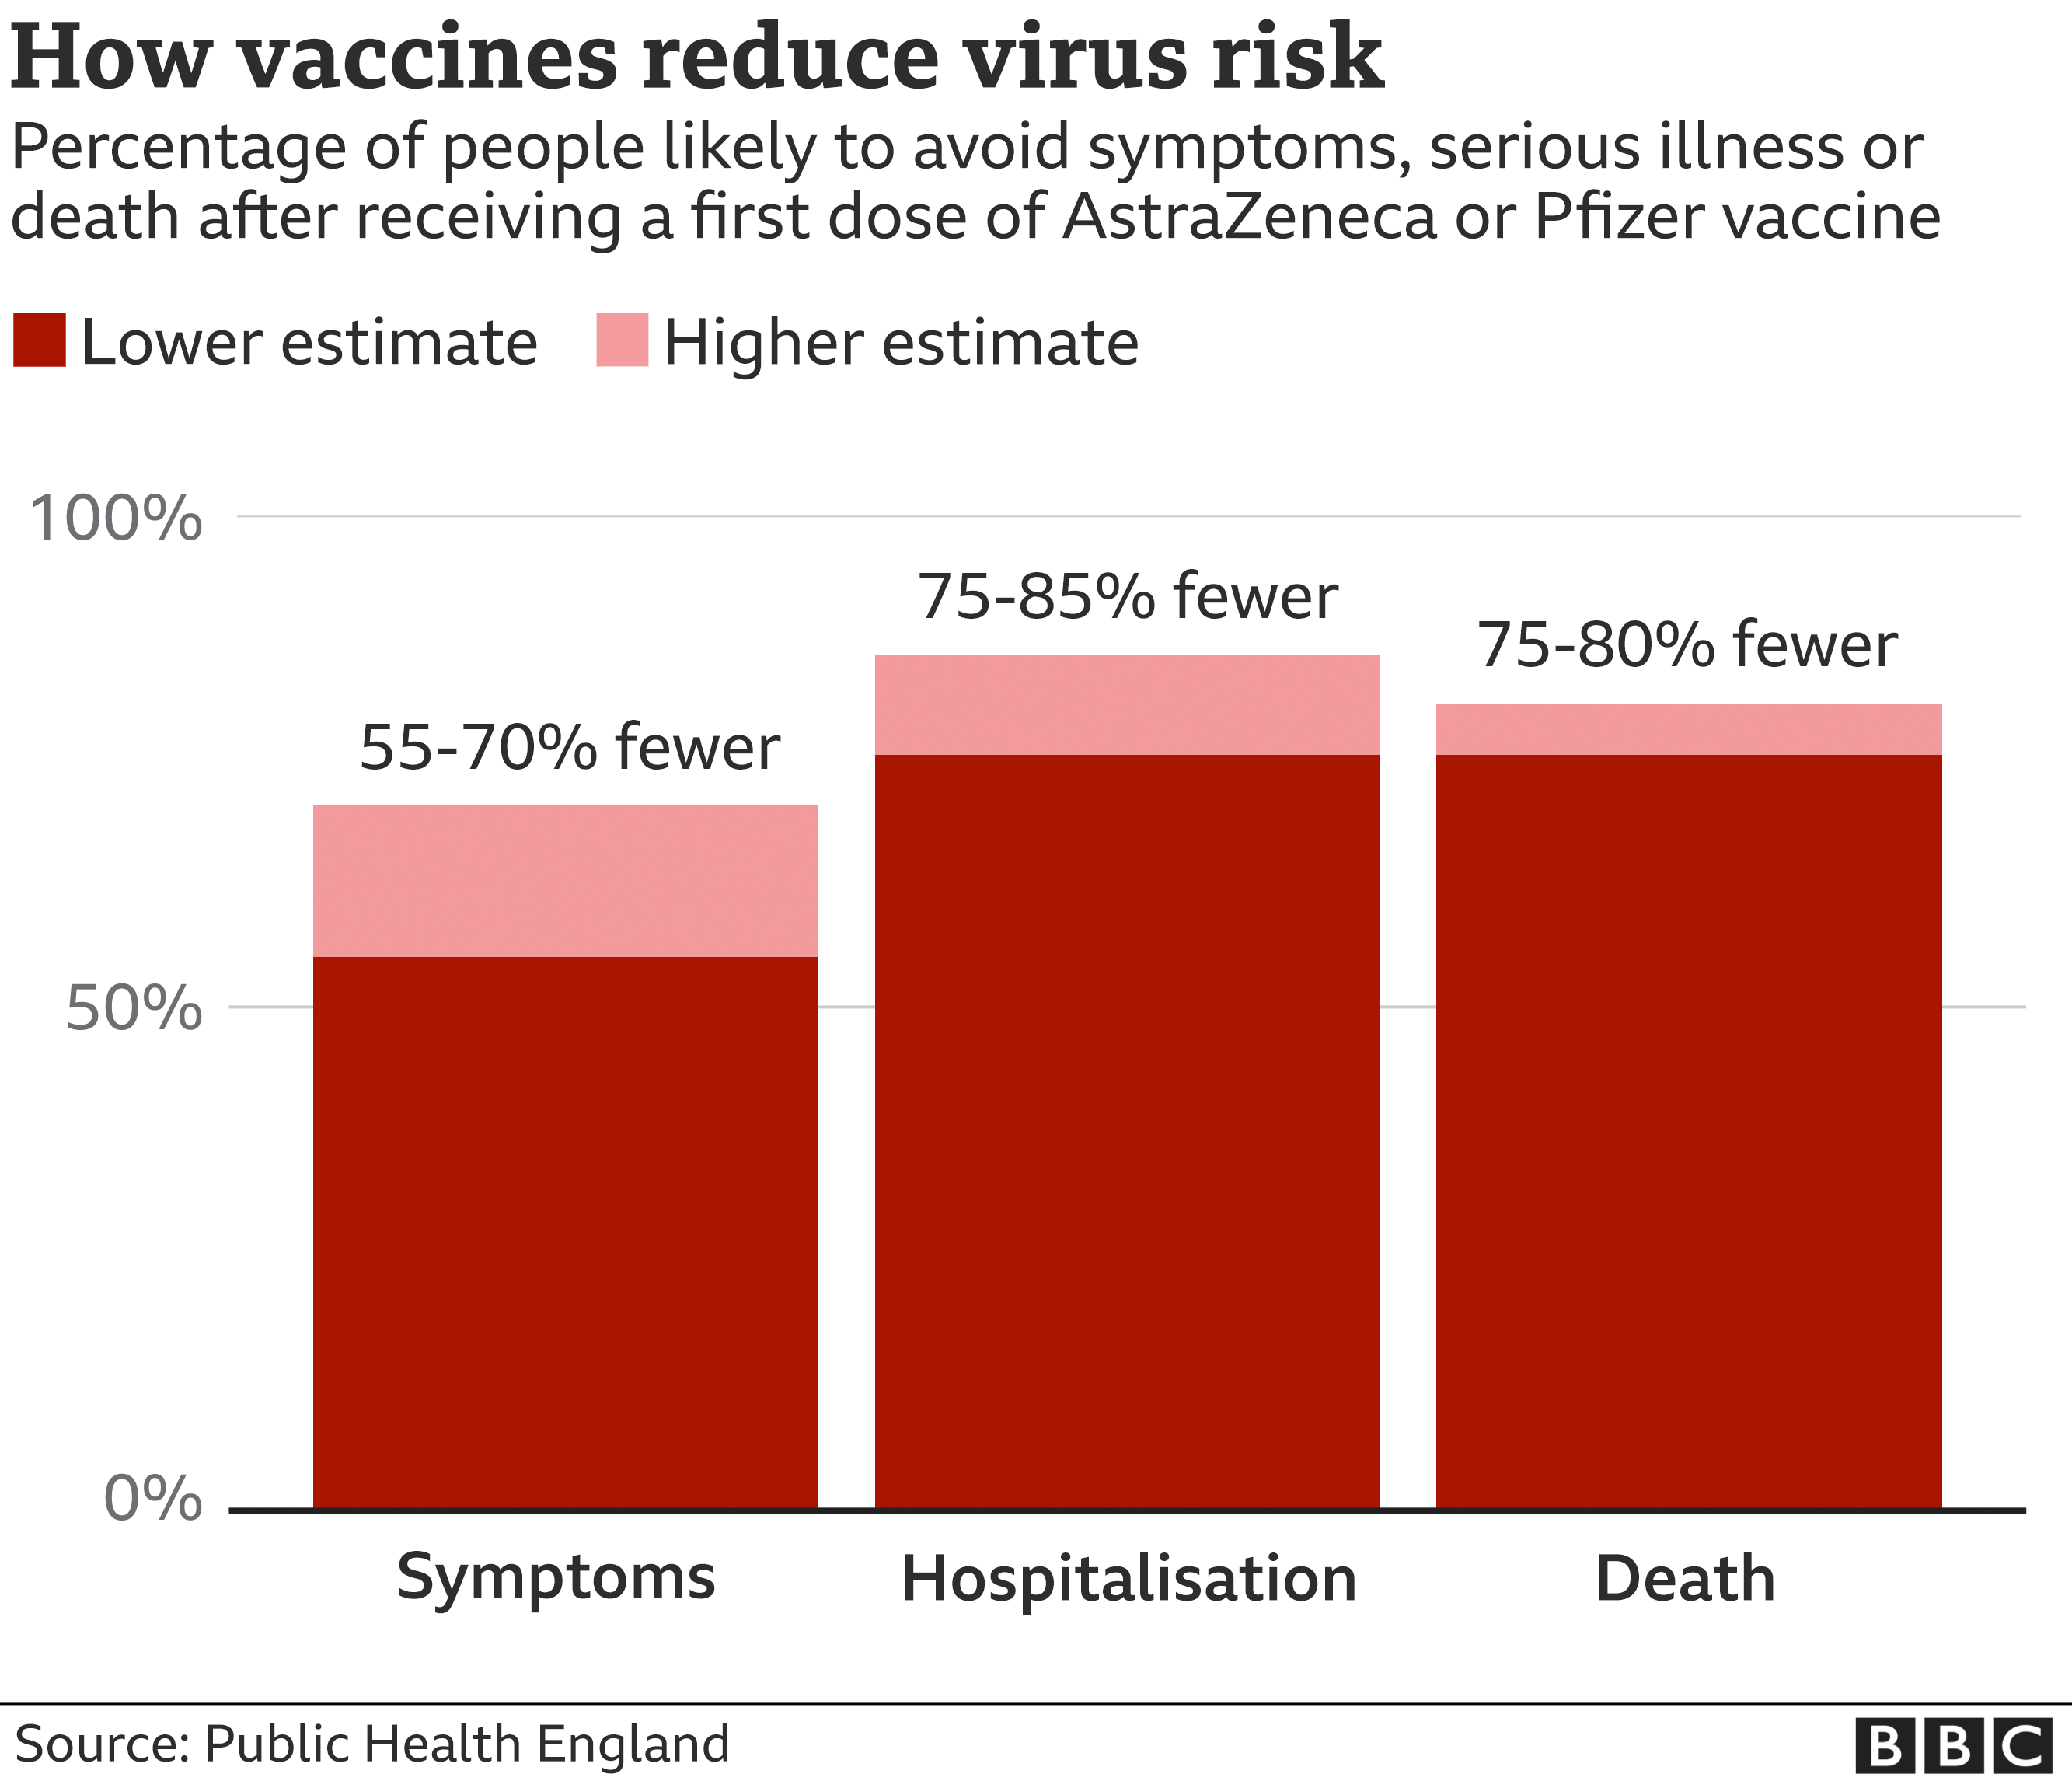 How vaccines reduce risk 11-5-2021 - enlarge